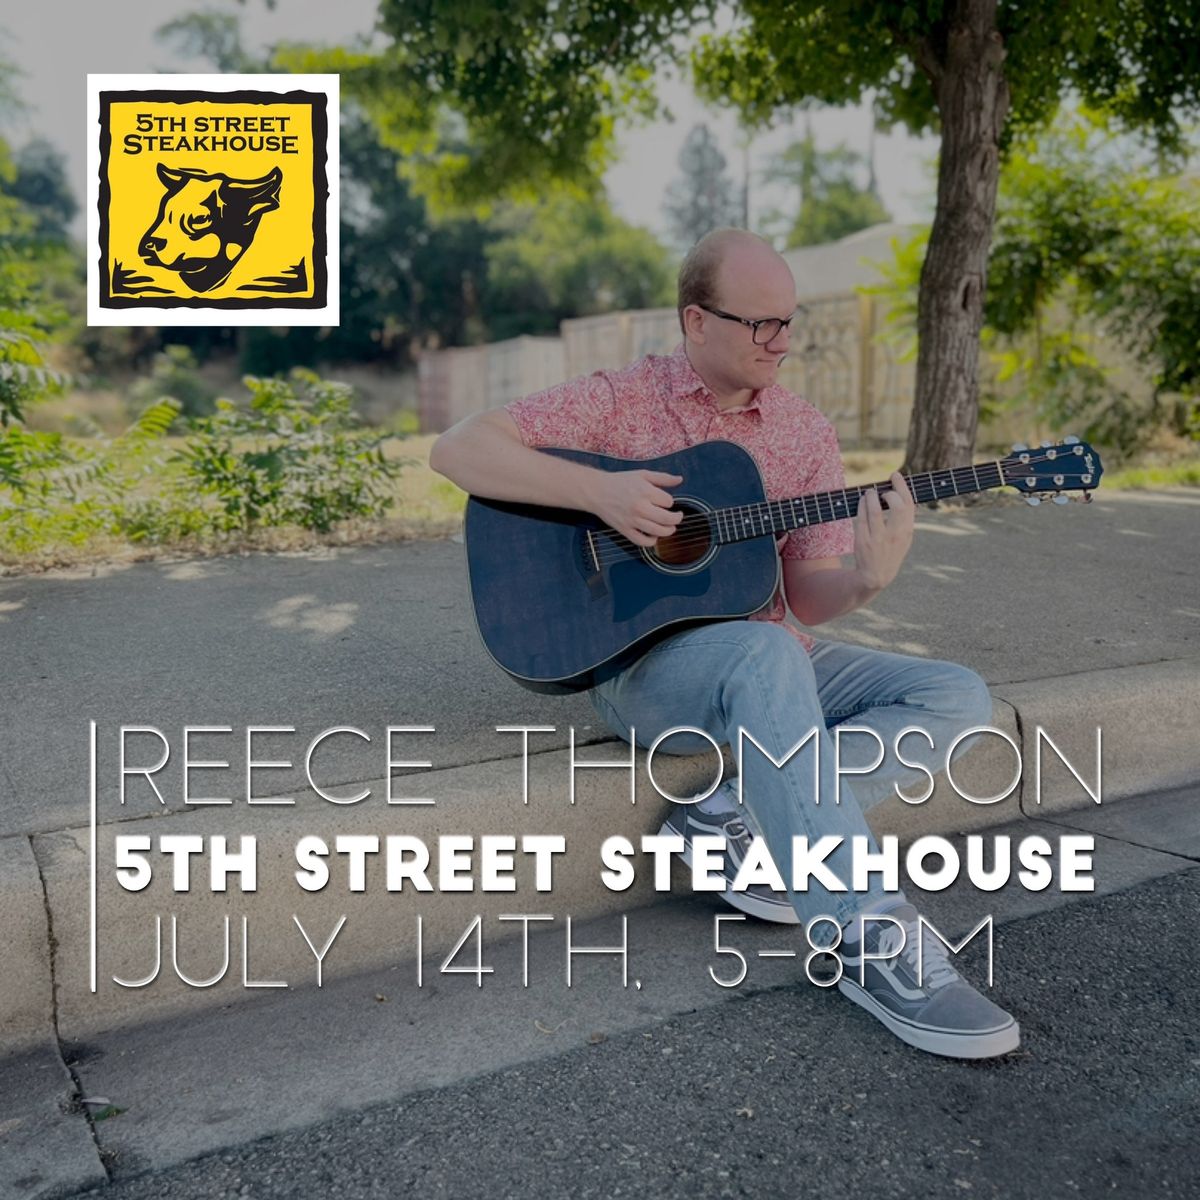 5th Street Steakhouse ft. Live Music by Reece Thompson